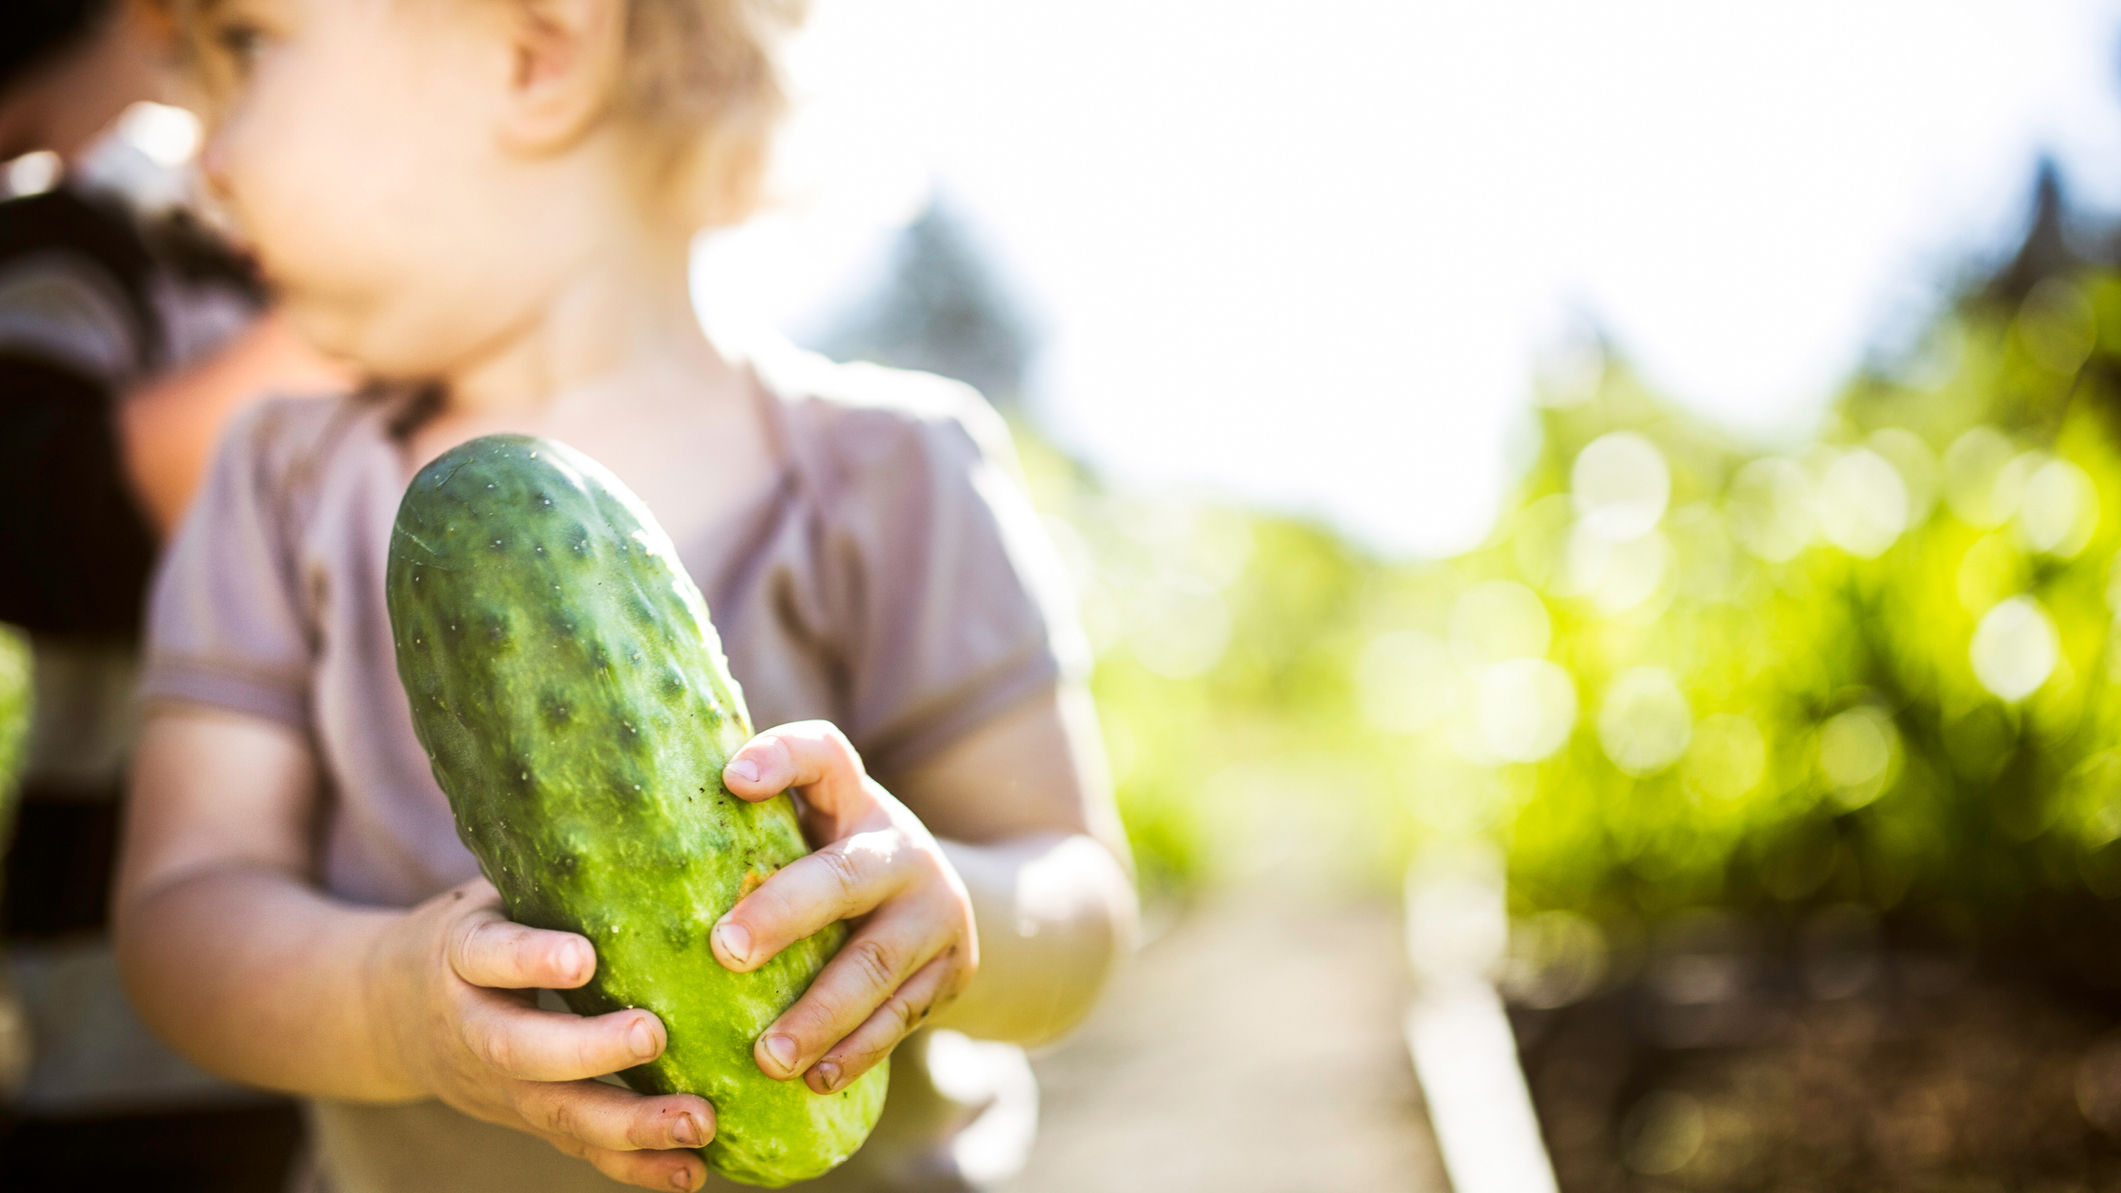 A cute little girl holds a freshly picked cucumber from a raised bed garden. Selective focus on the cucumber in the foreground.